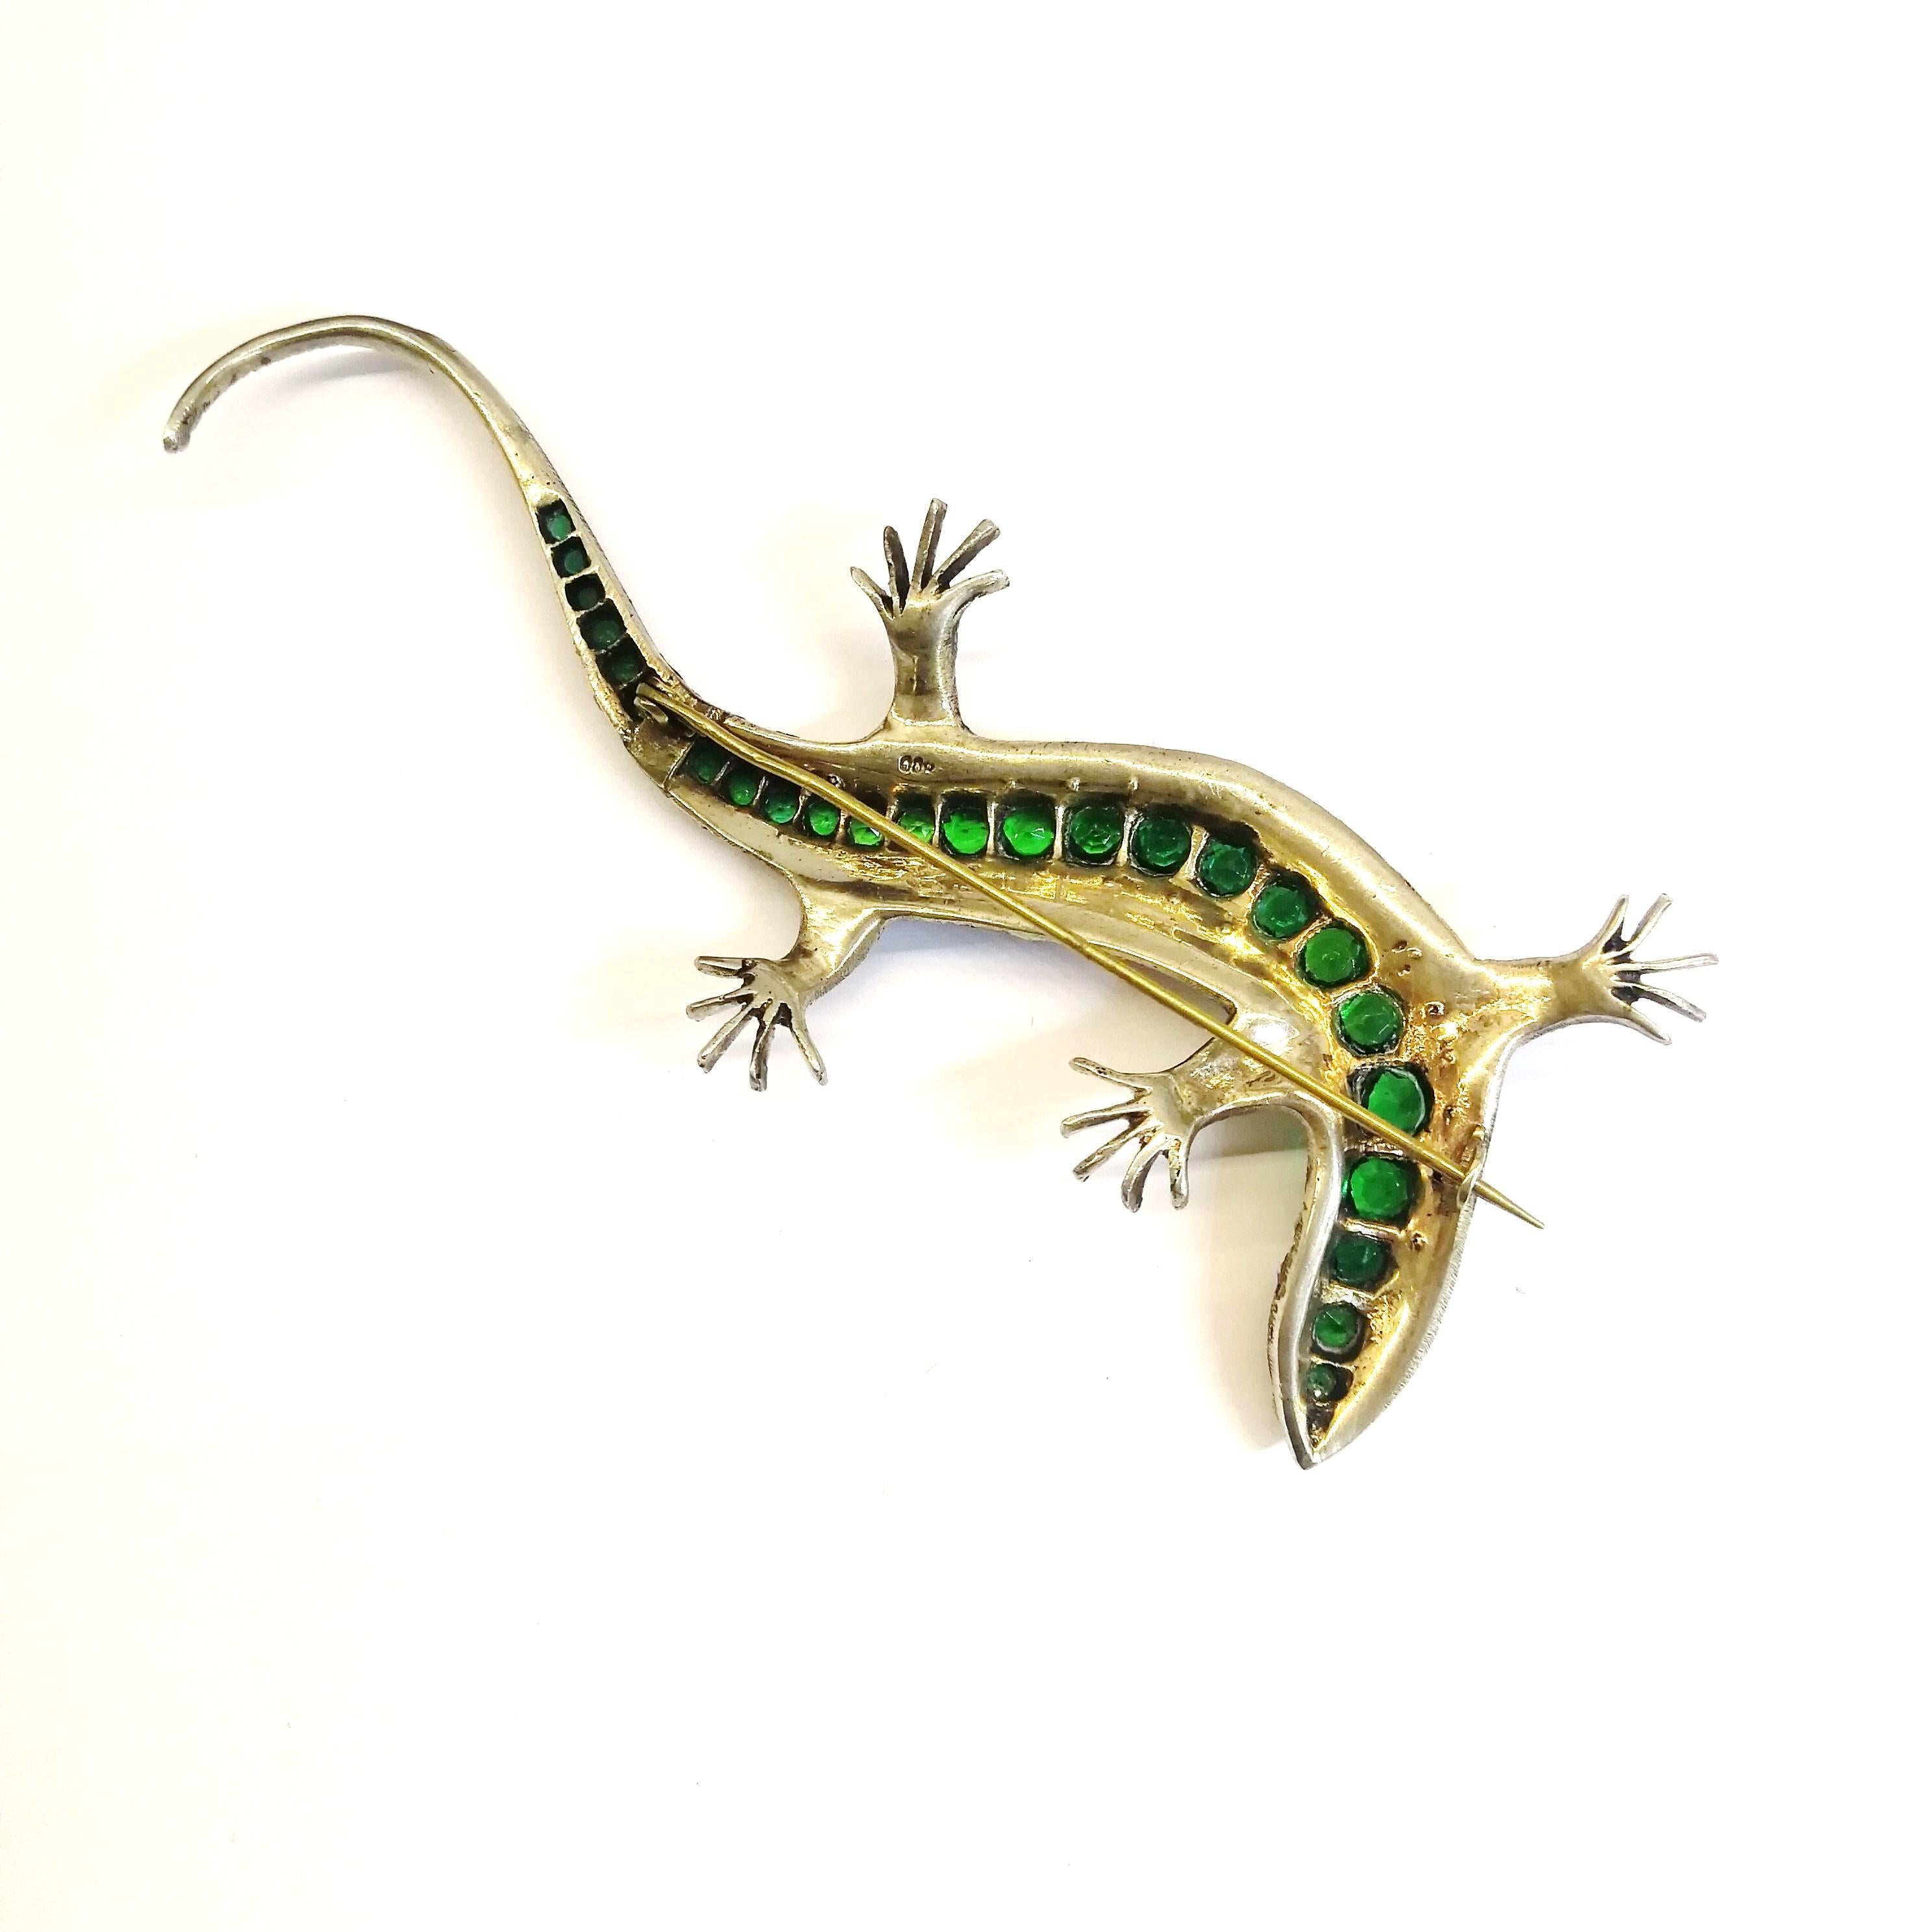 A very large striking sterling silver 'lizard' brooch, in serpentine form, set with old cut emerald and clear pastes, and a ruby paste 'eye', from the early 1900s. it is most probably made in England. It is softly gilded on the reverse, whist the